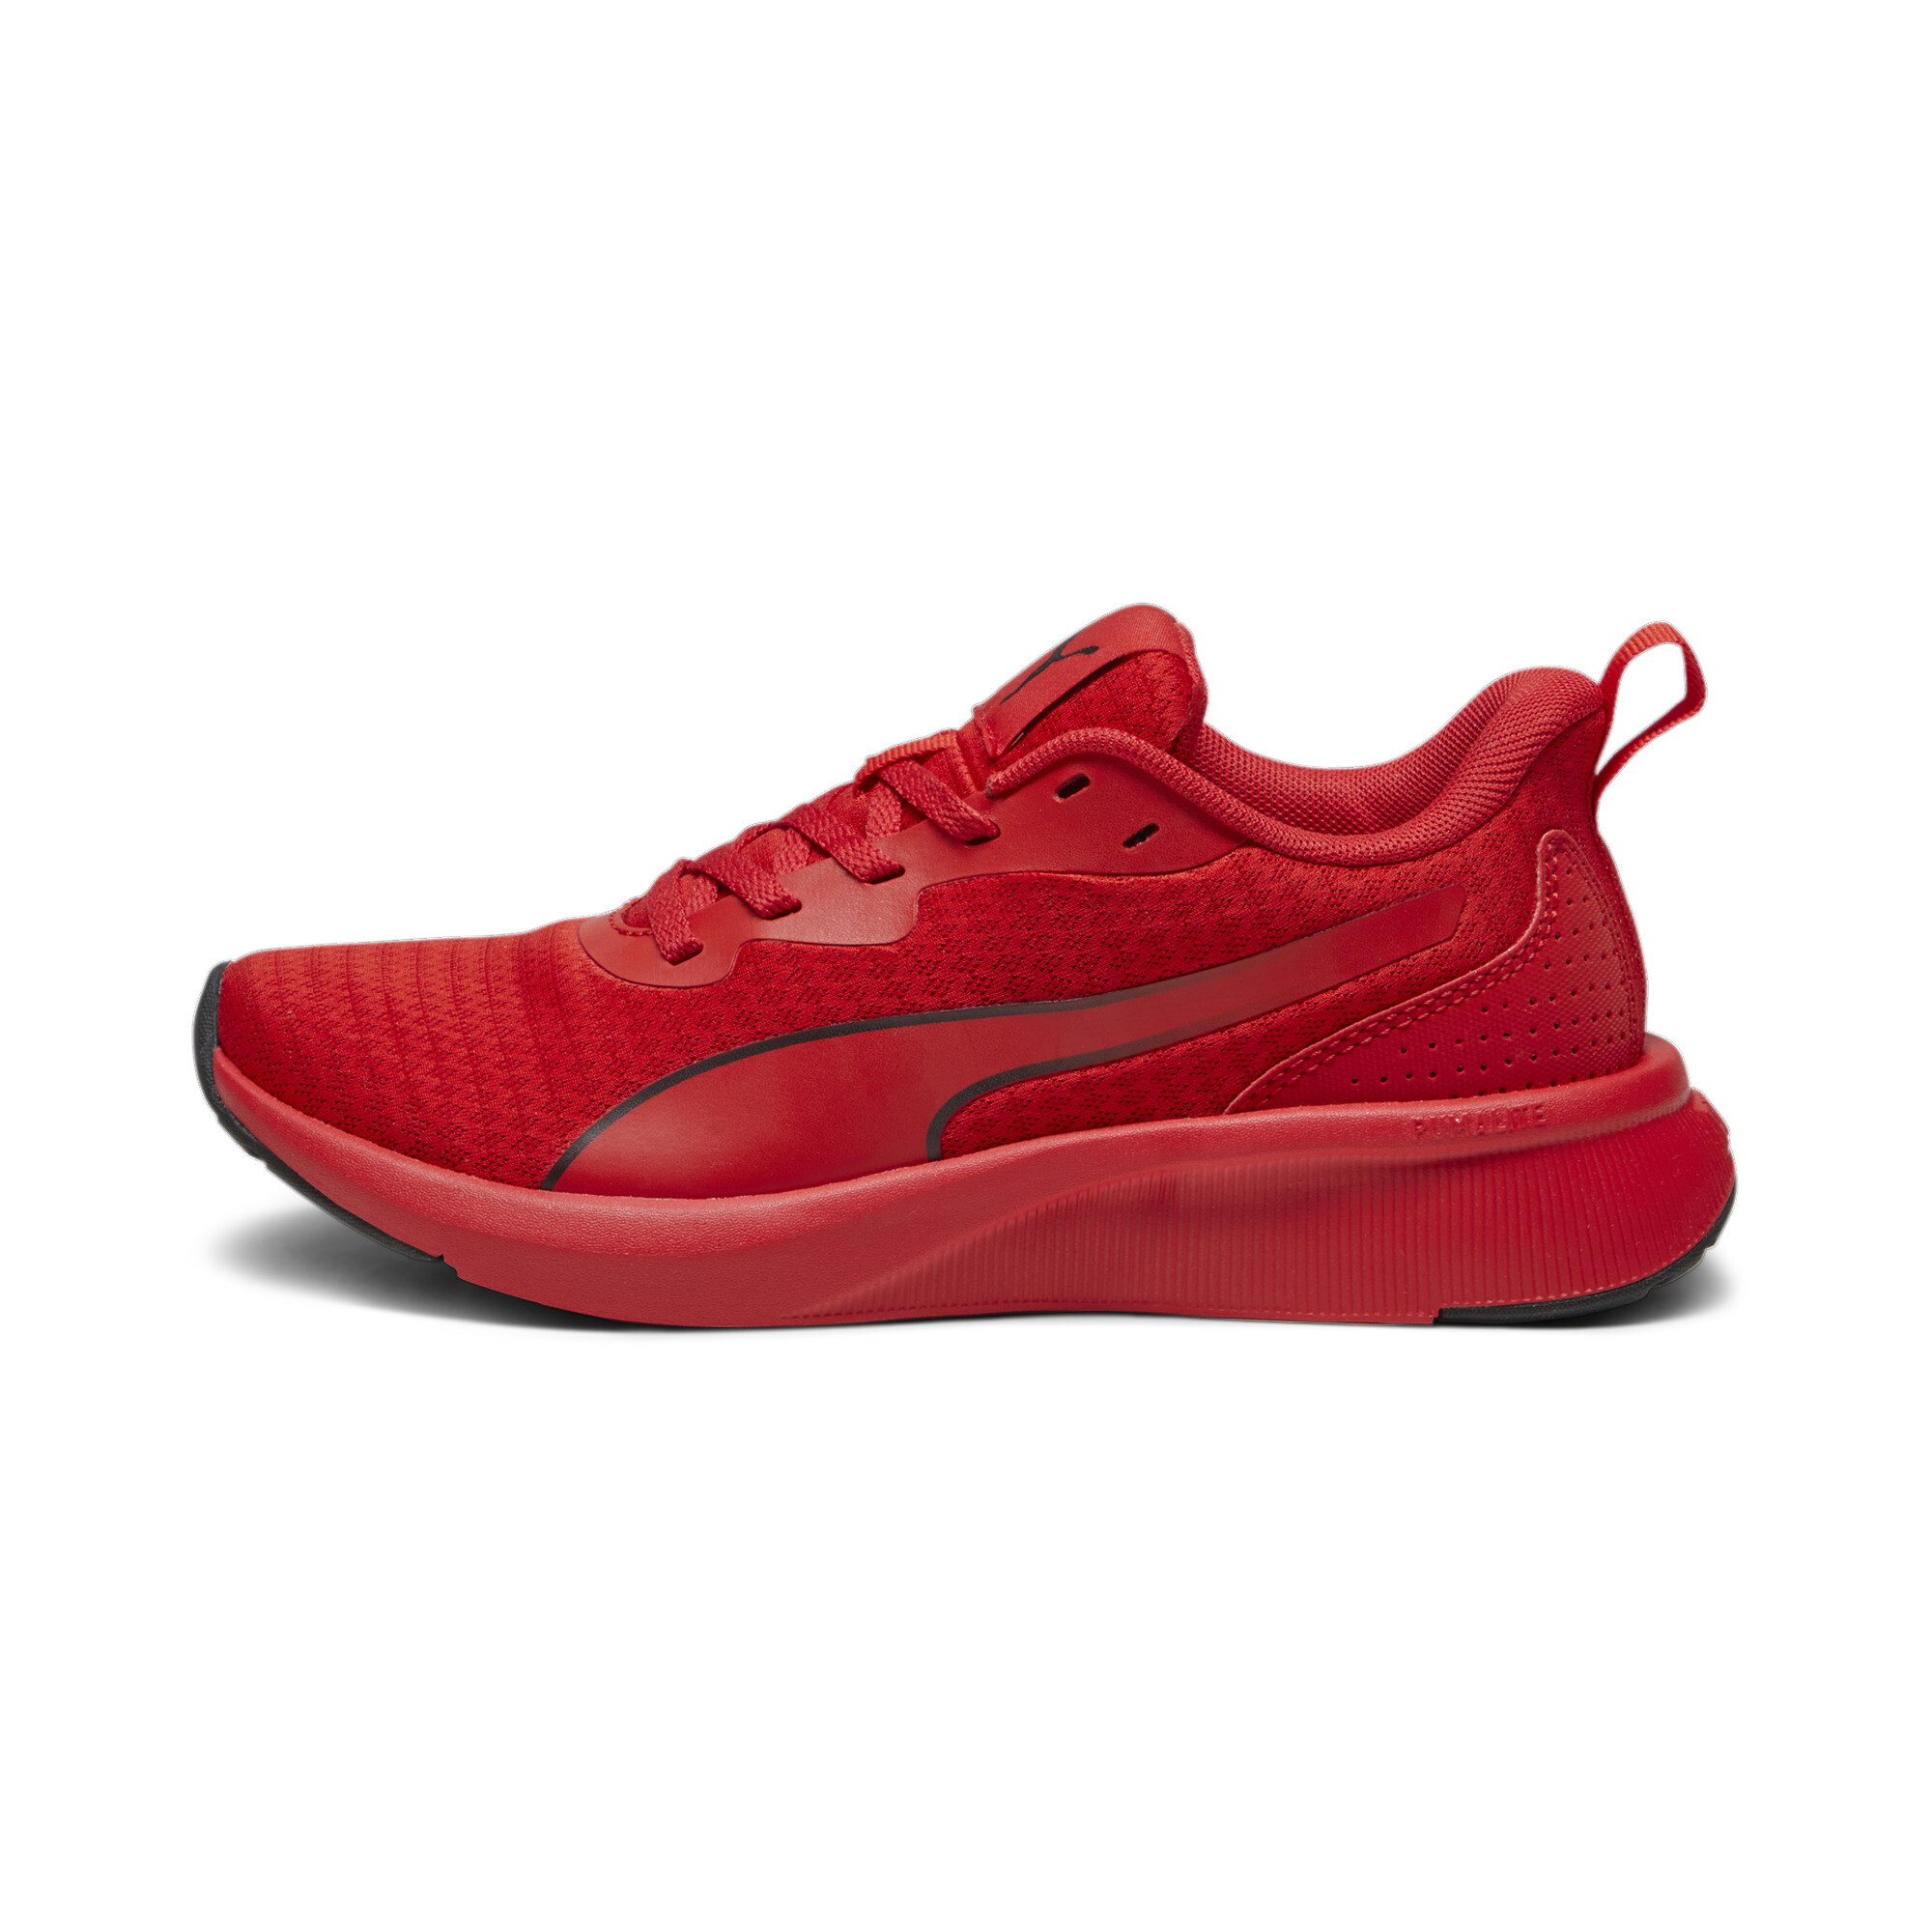 Puma Flyer Lite Youth Sneakers, Red, Size 38, Shoes